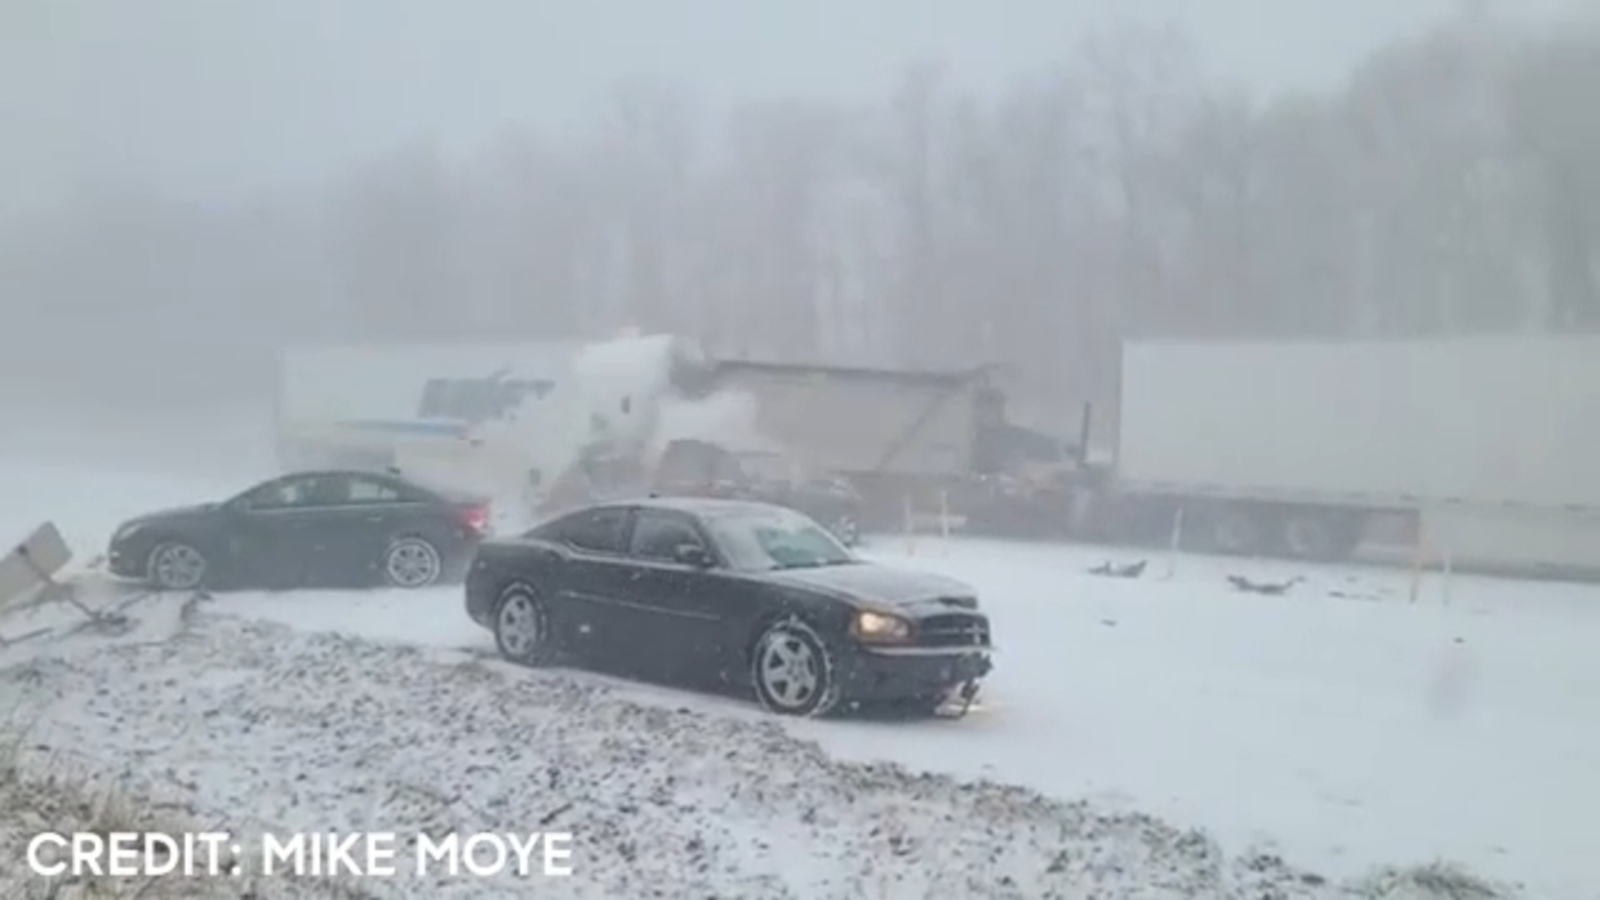 5 dead after pileup on Pennsylvania highway that was caught on video